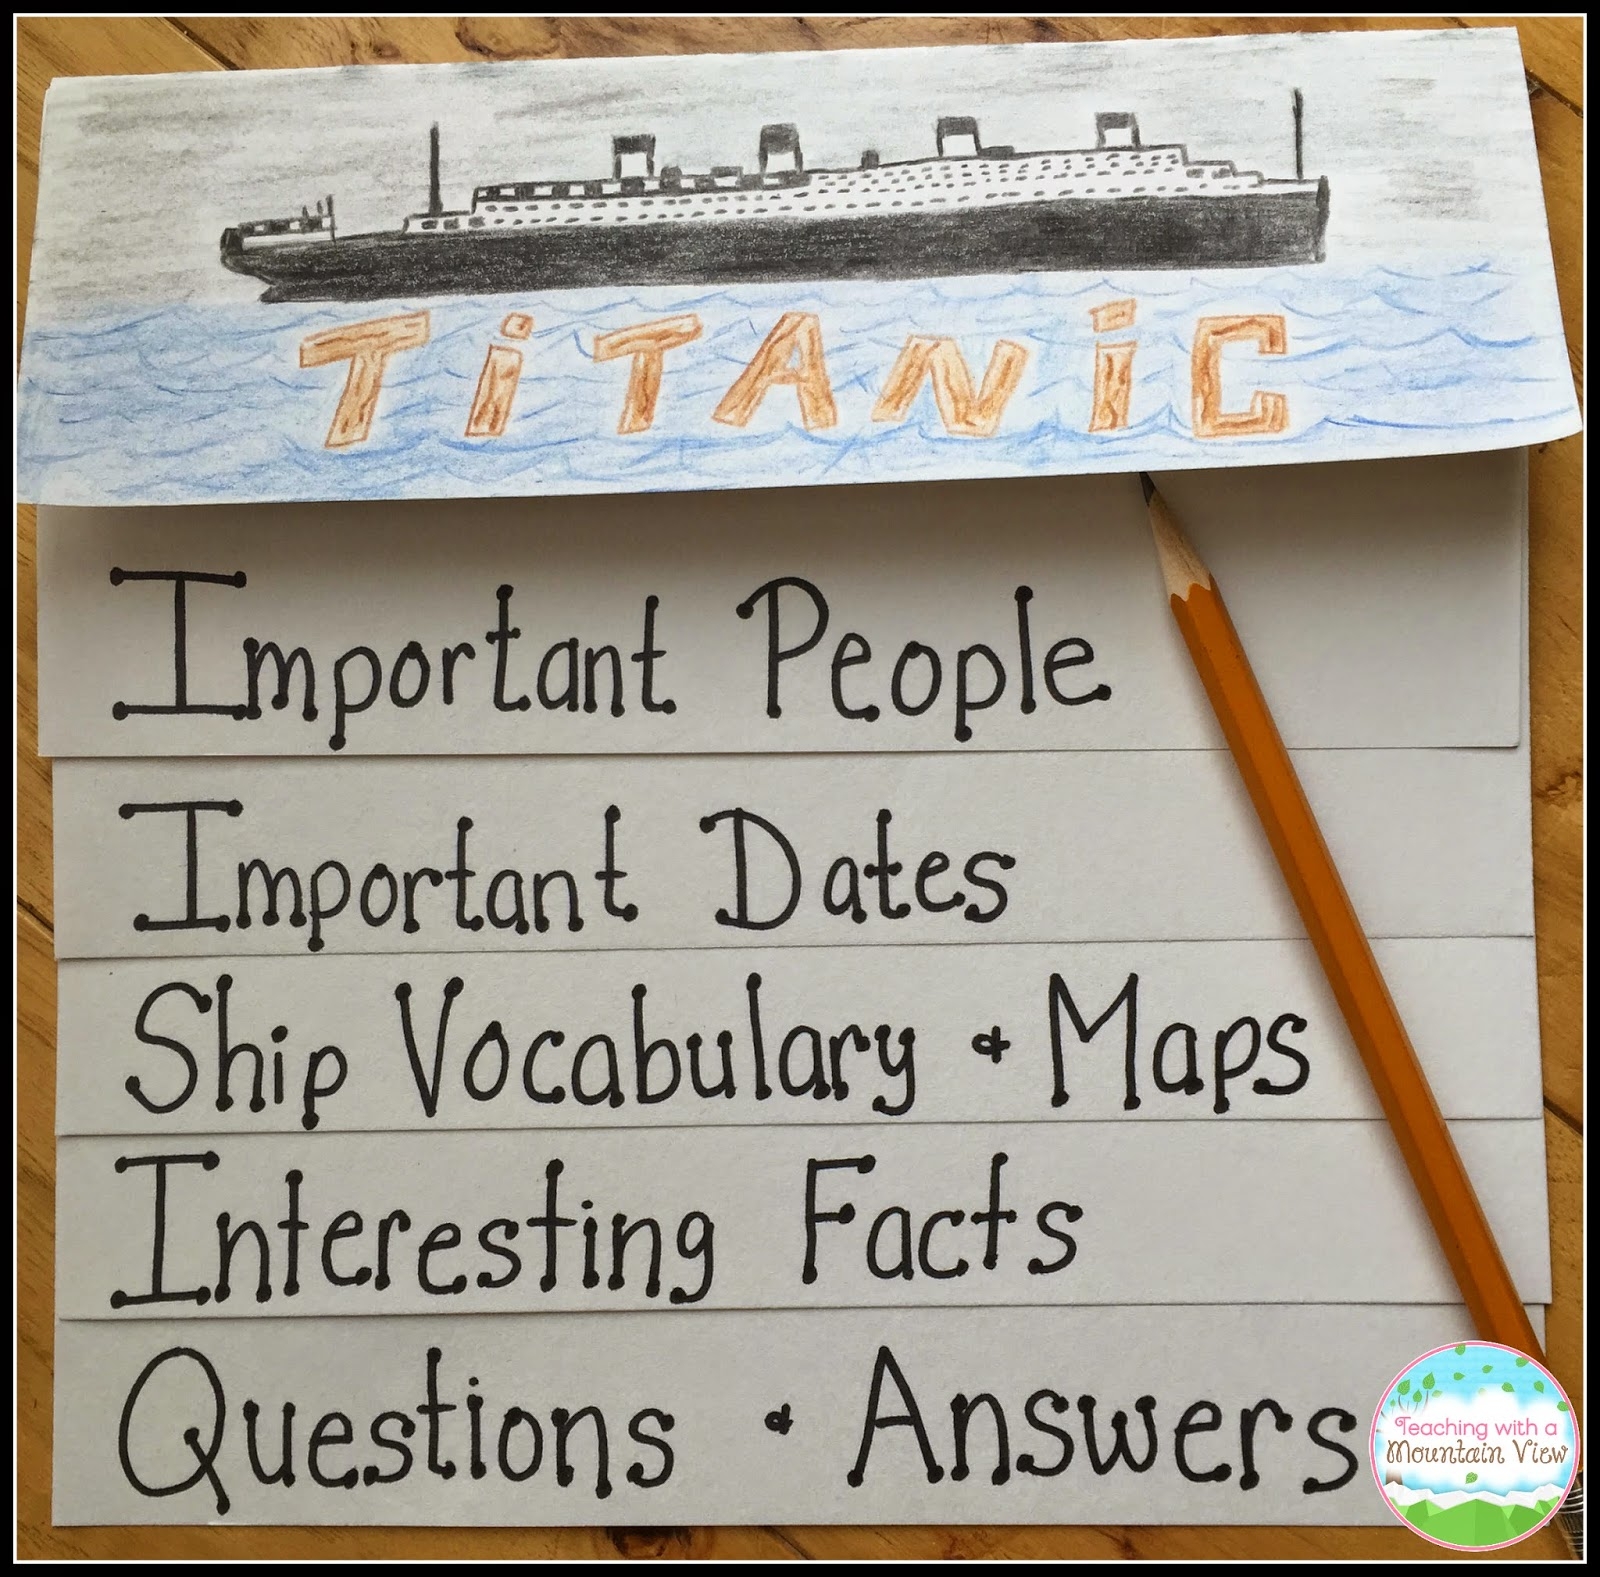 titanic-lessons-experiments-activities-and-more-teaching-with-a-mountain-view-math-worksheet